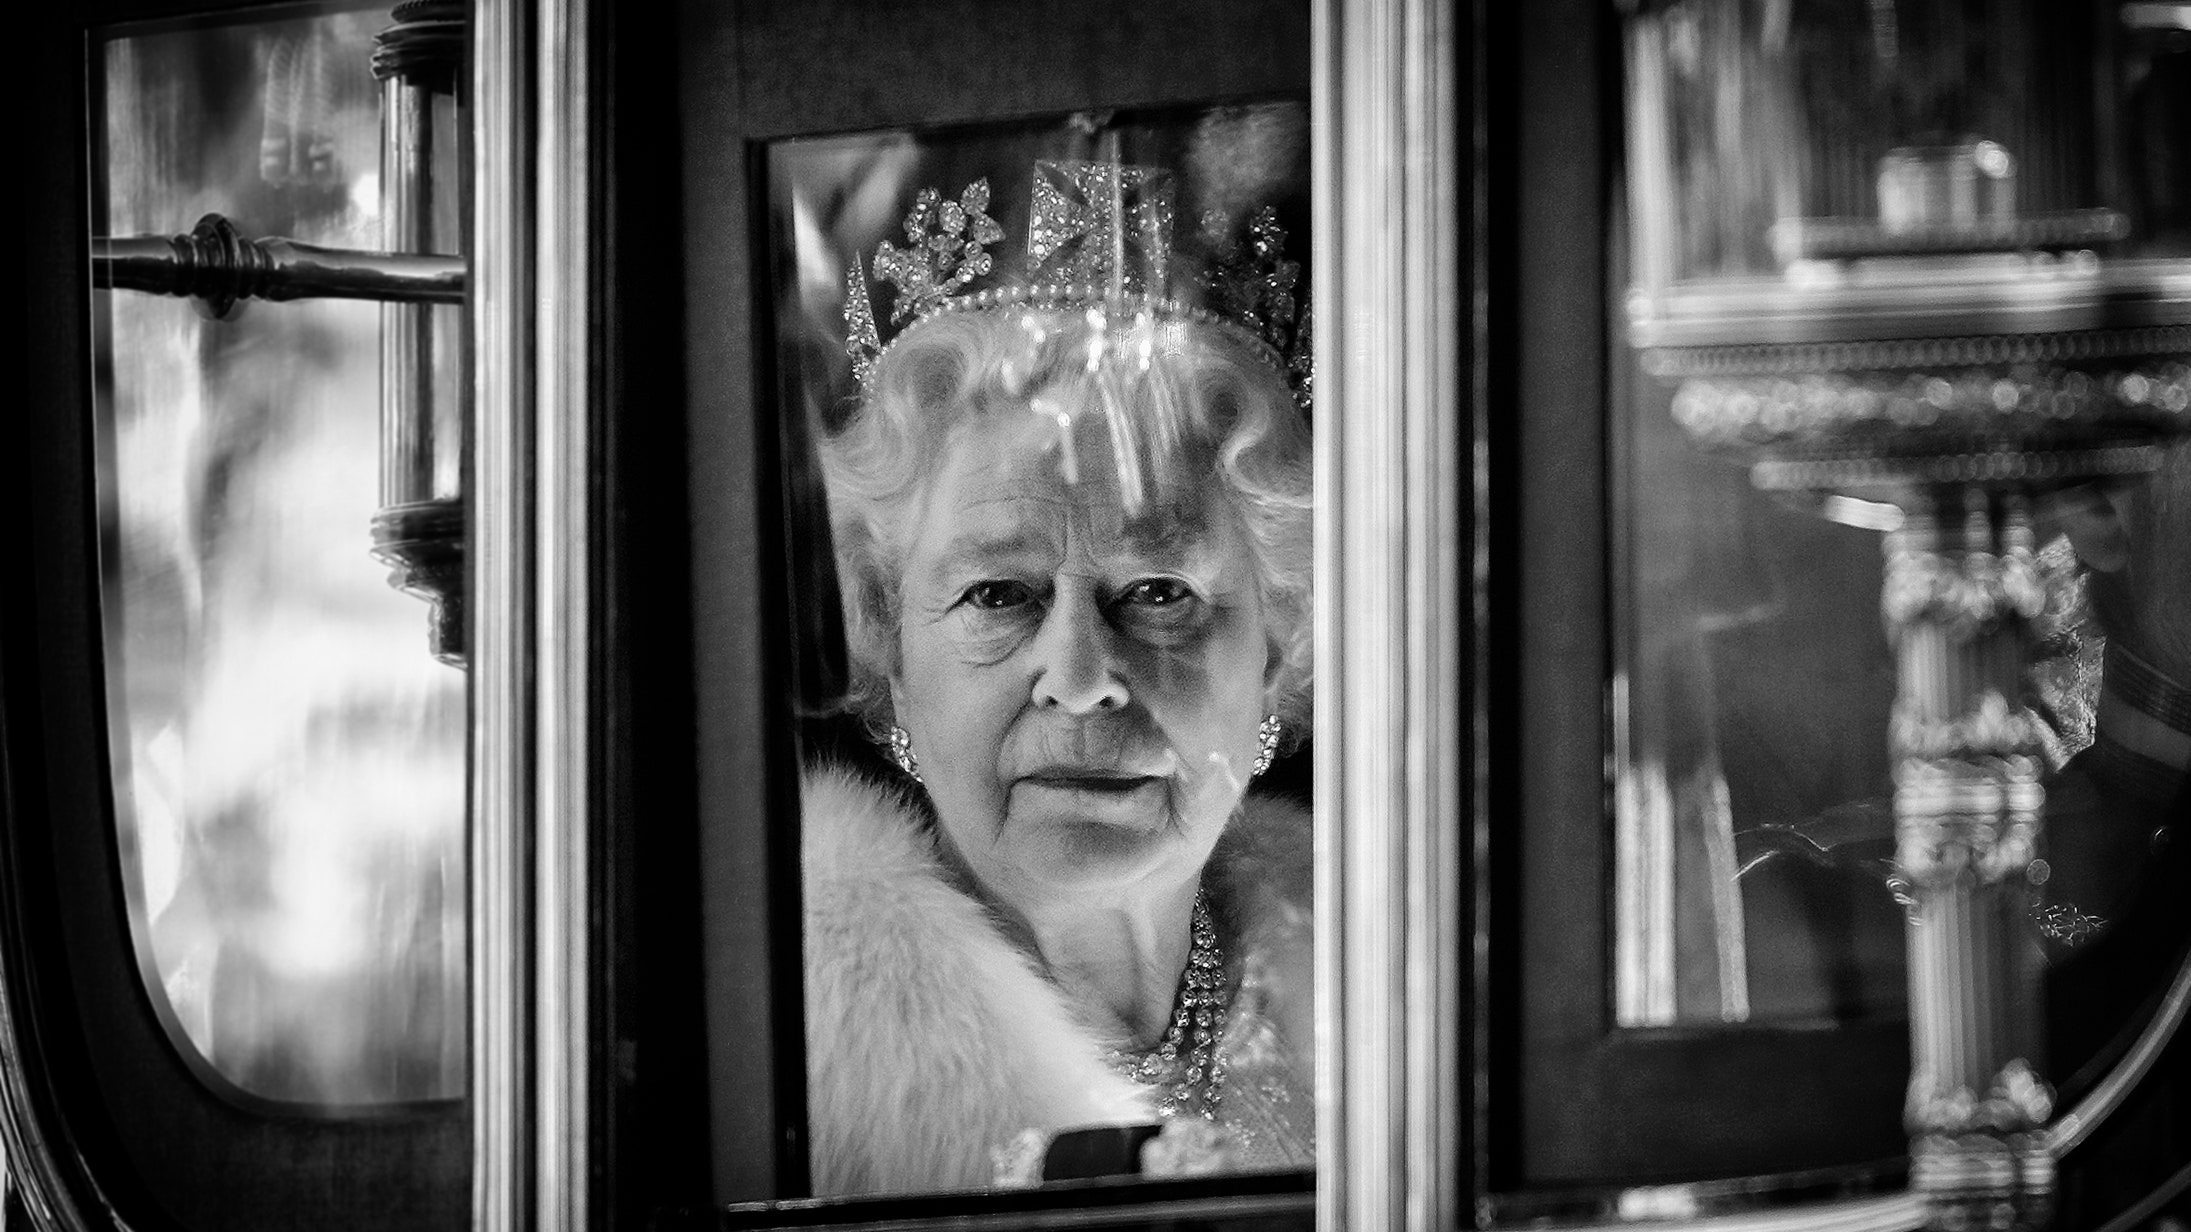 christopher w smith share fuck me your majesty photos